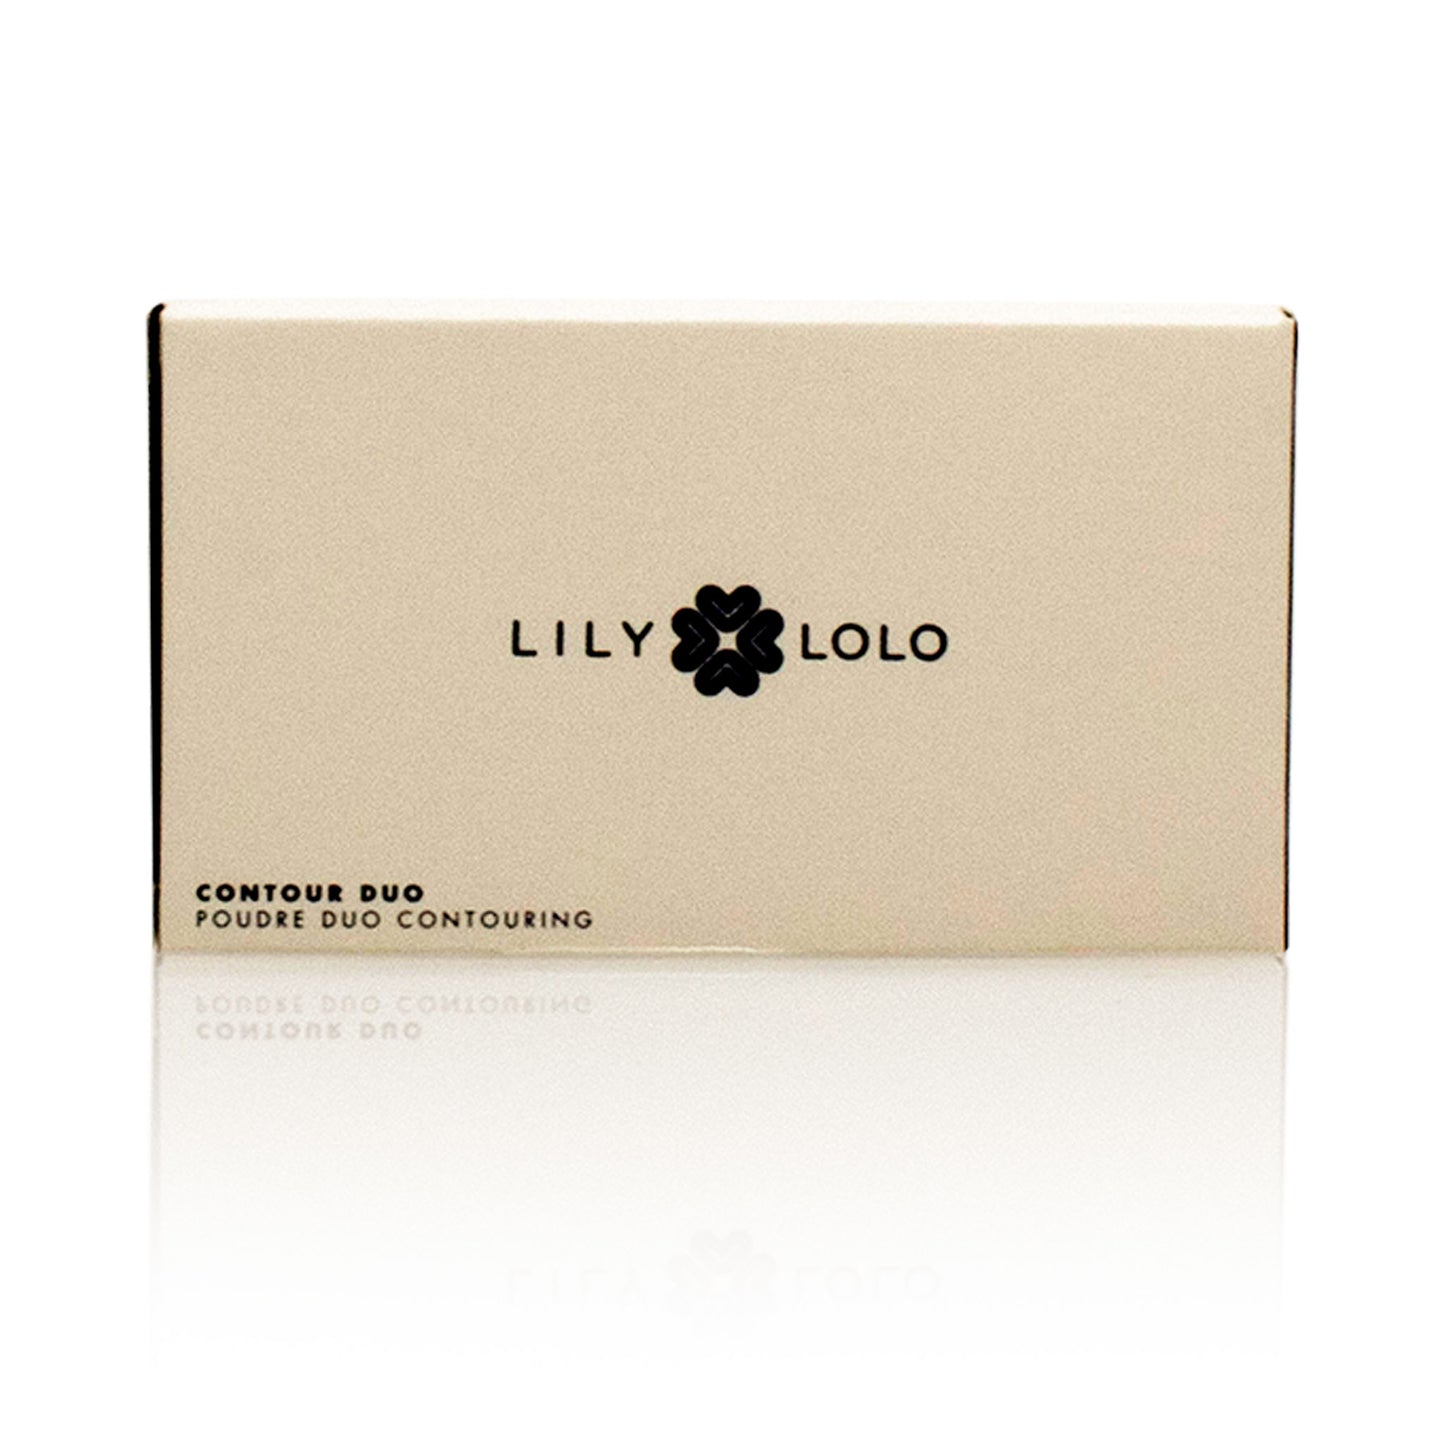 LILY LOLO CONTOUR DUO SCULPT AND GLOW